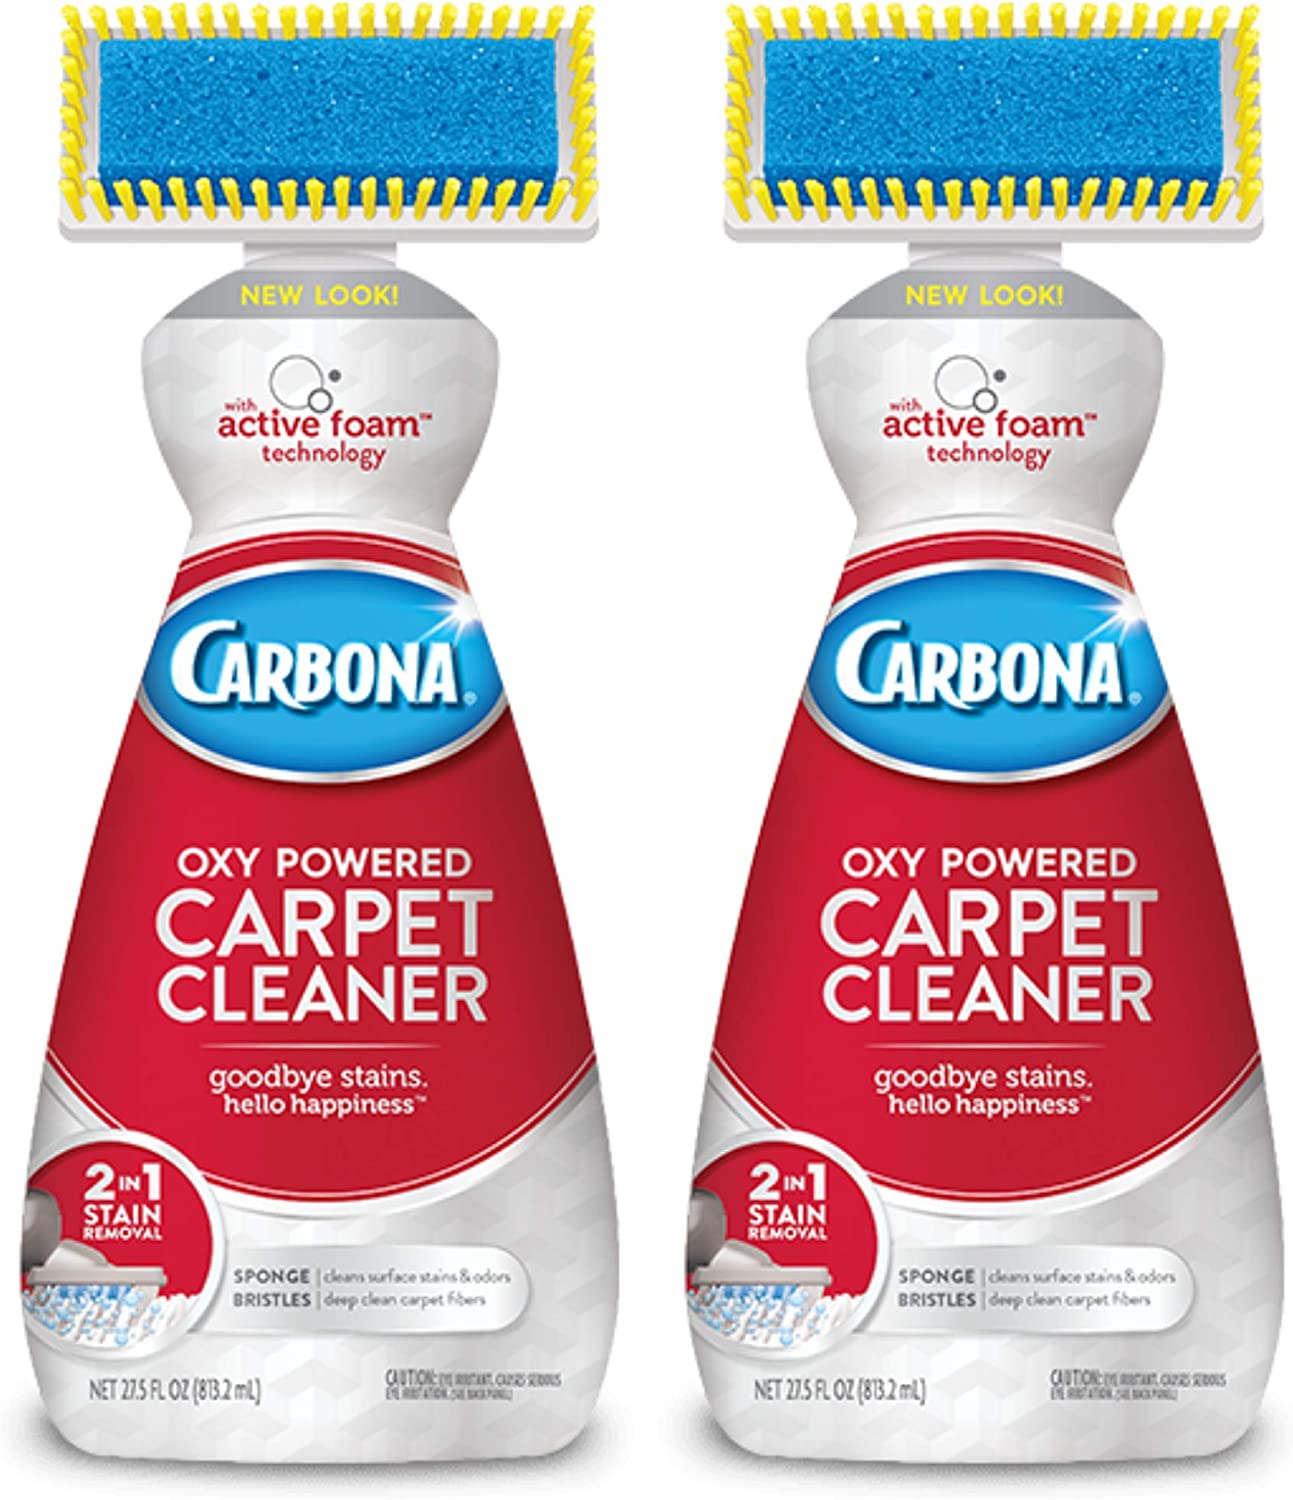 Carbona Stain Removing Active Foam Carpet Cleaner, 2-Pack